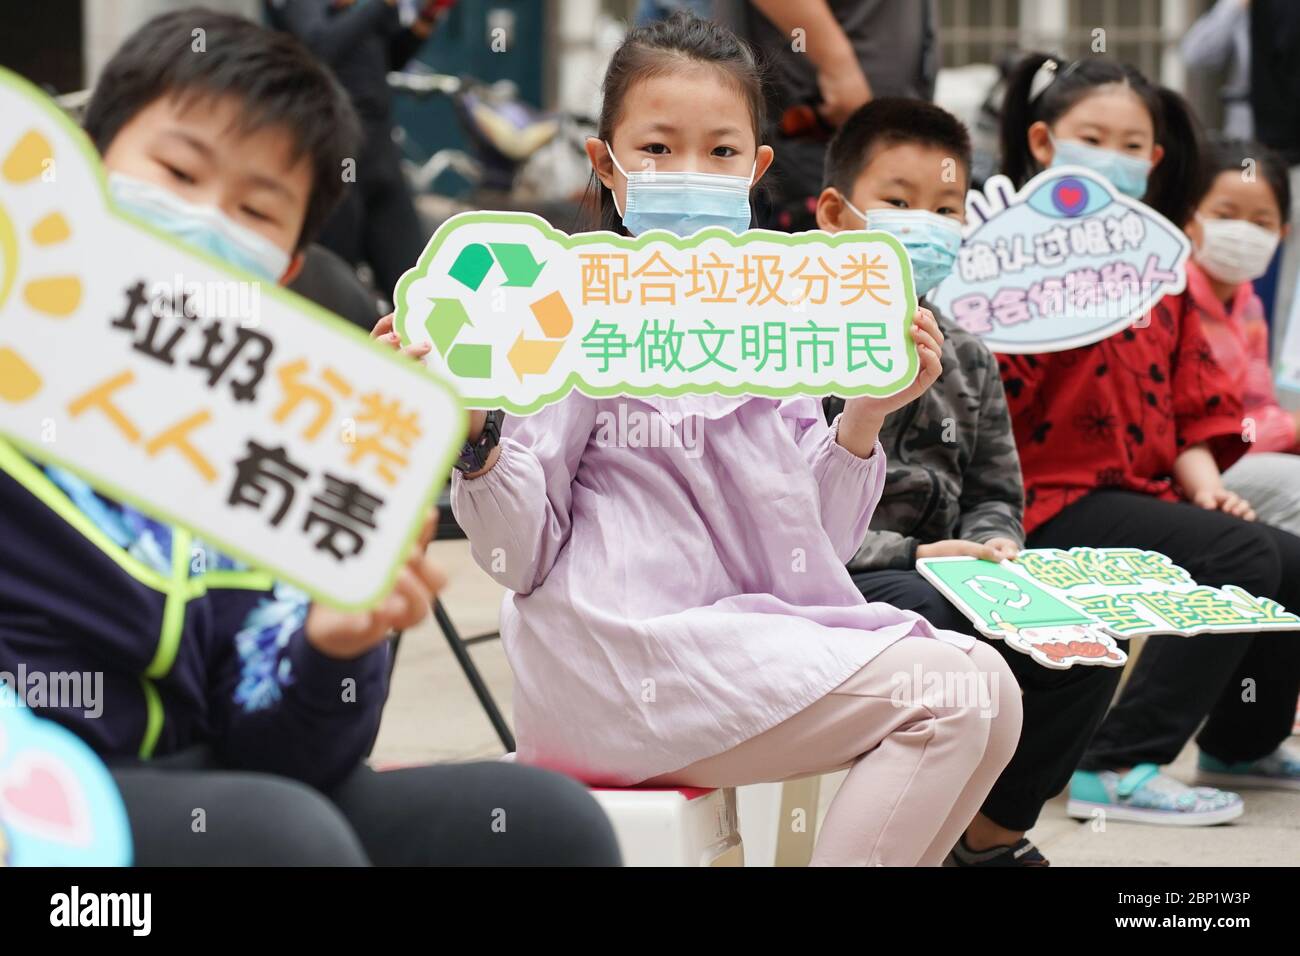 Beijing, China. 17th May, 2020. Young volunteers display placards showing  garbage sorting slogans at the Shaojiu residential community in Dongcheng  District of Beijing, capital of China, May 17, 2020. The Shaojiu community